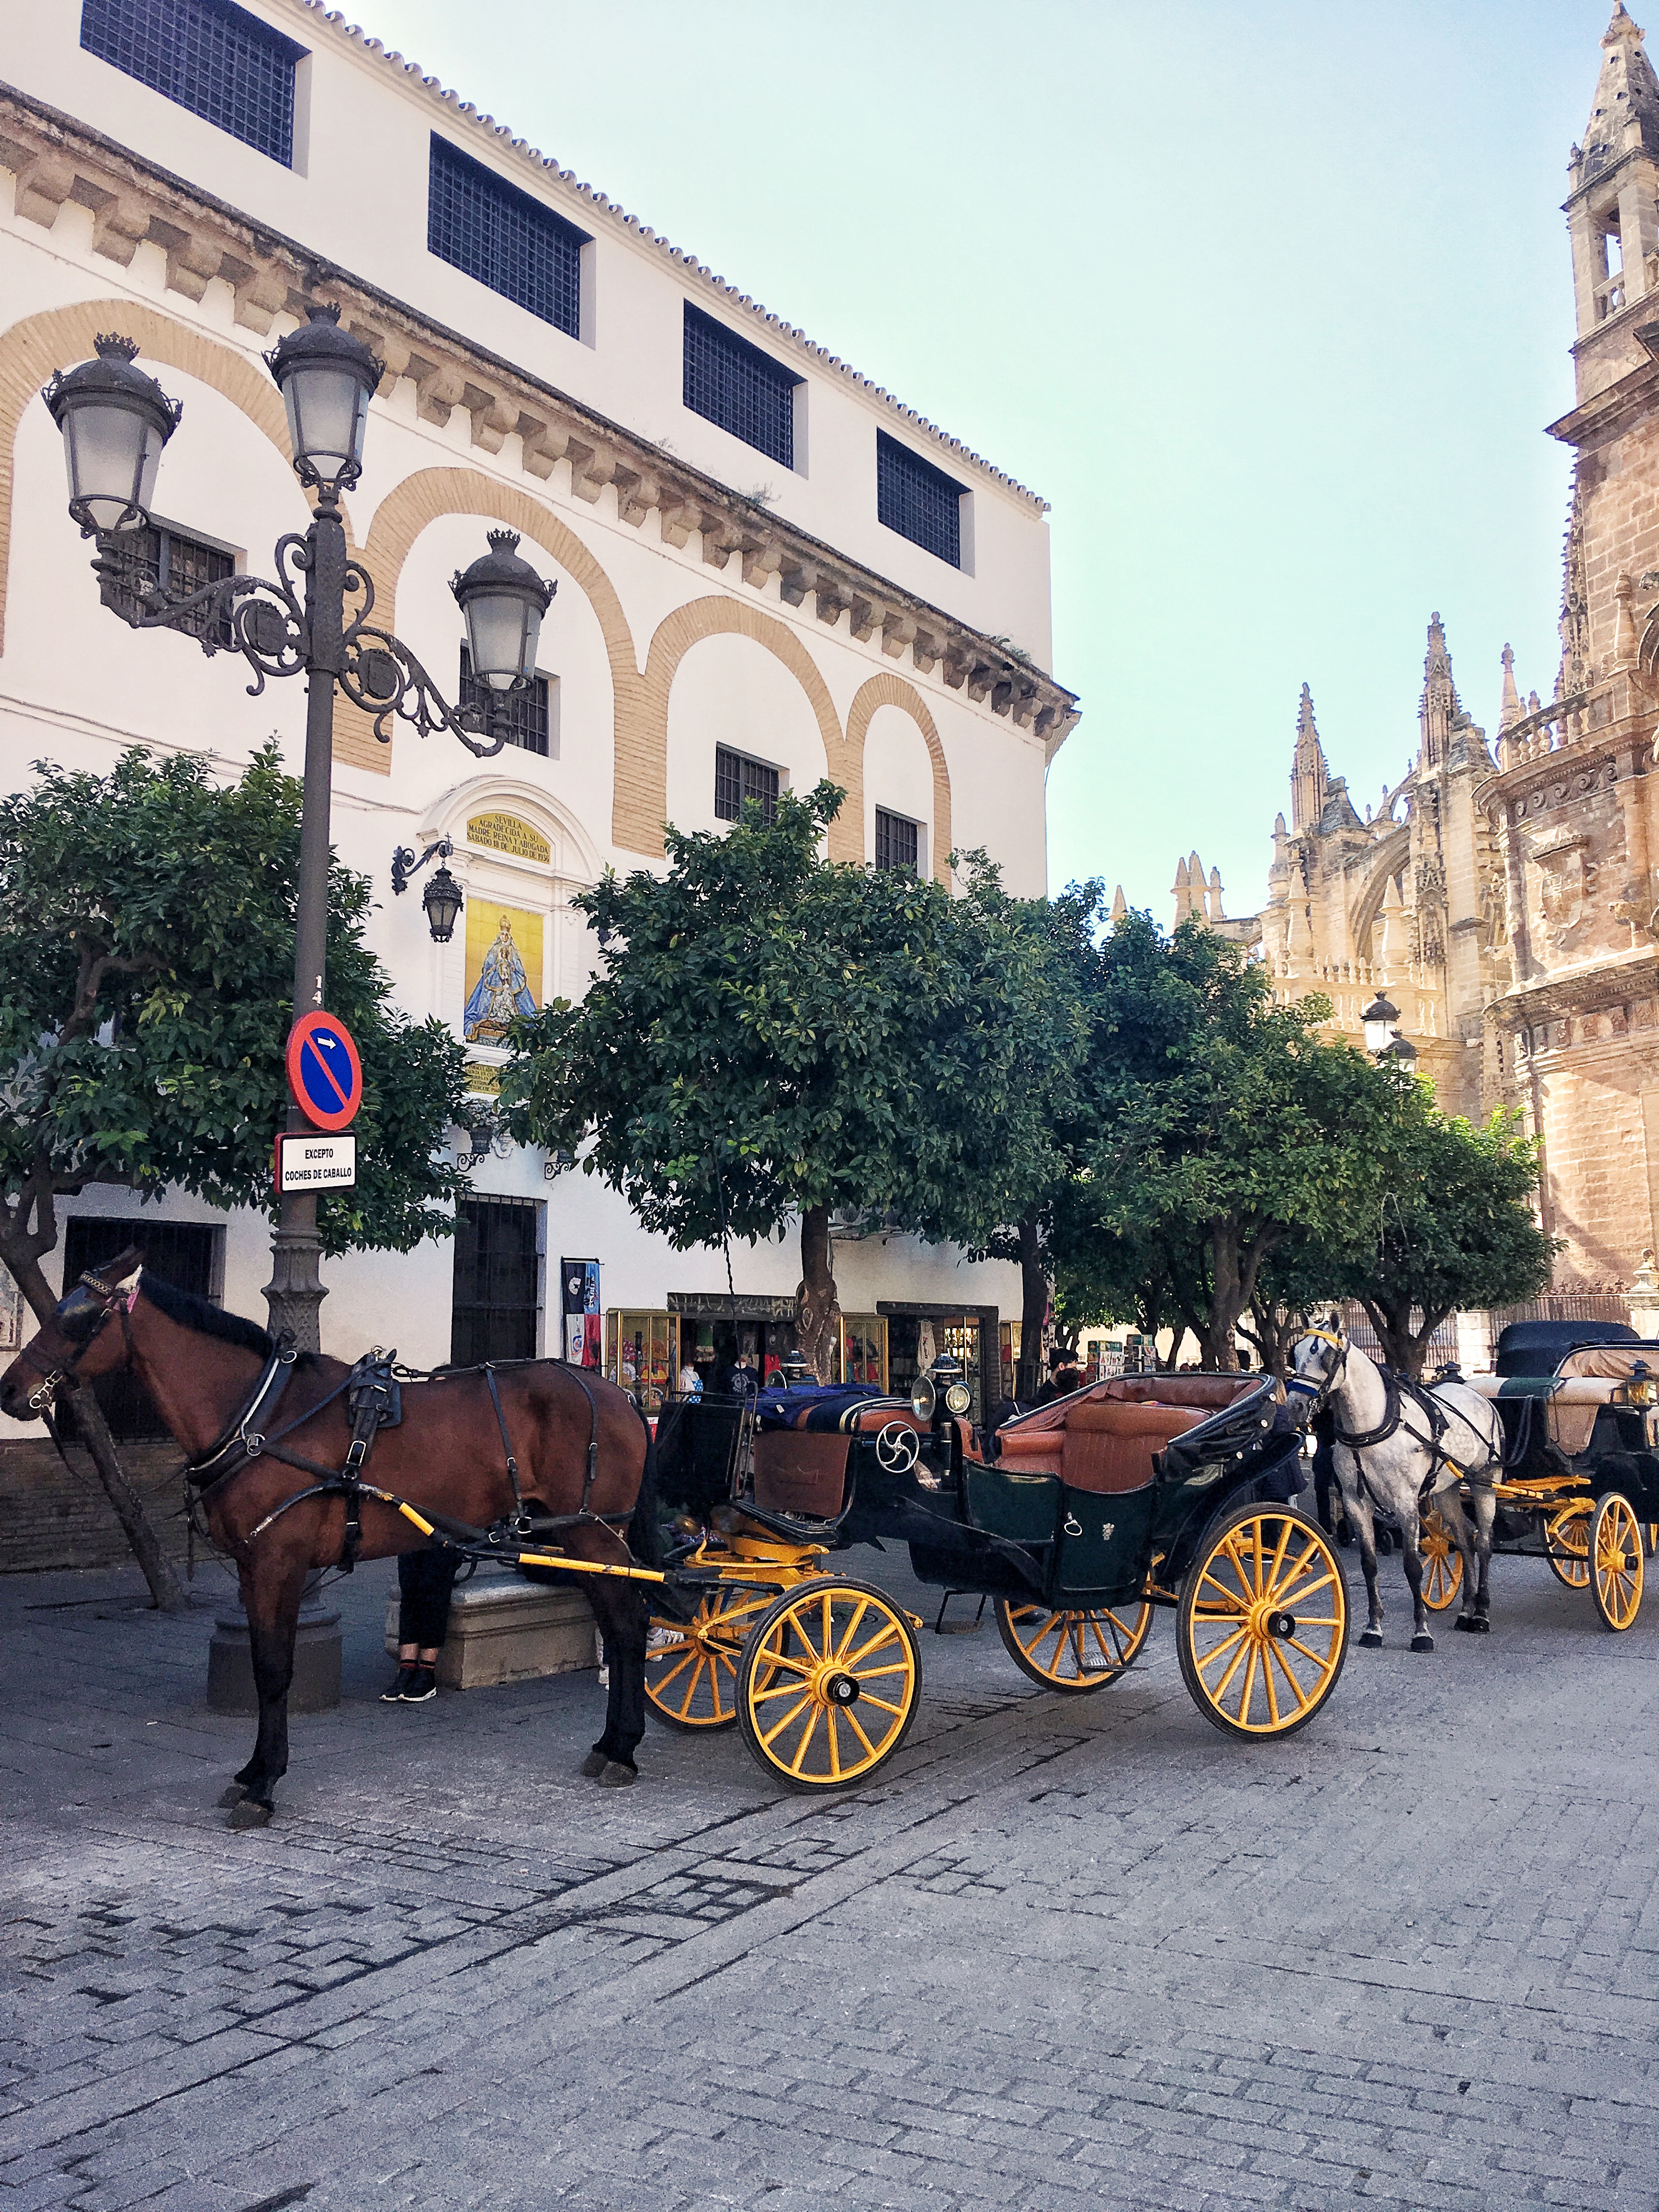 Horse carriages in Seville Spain